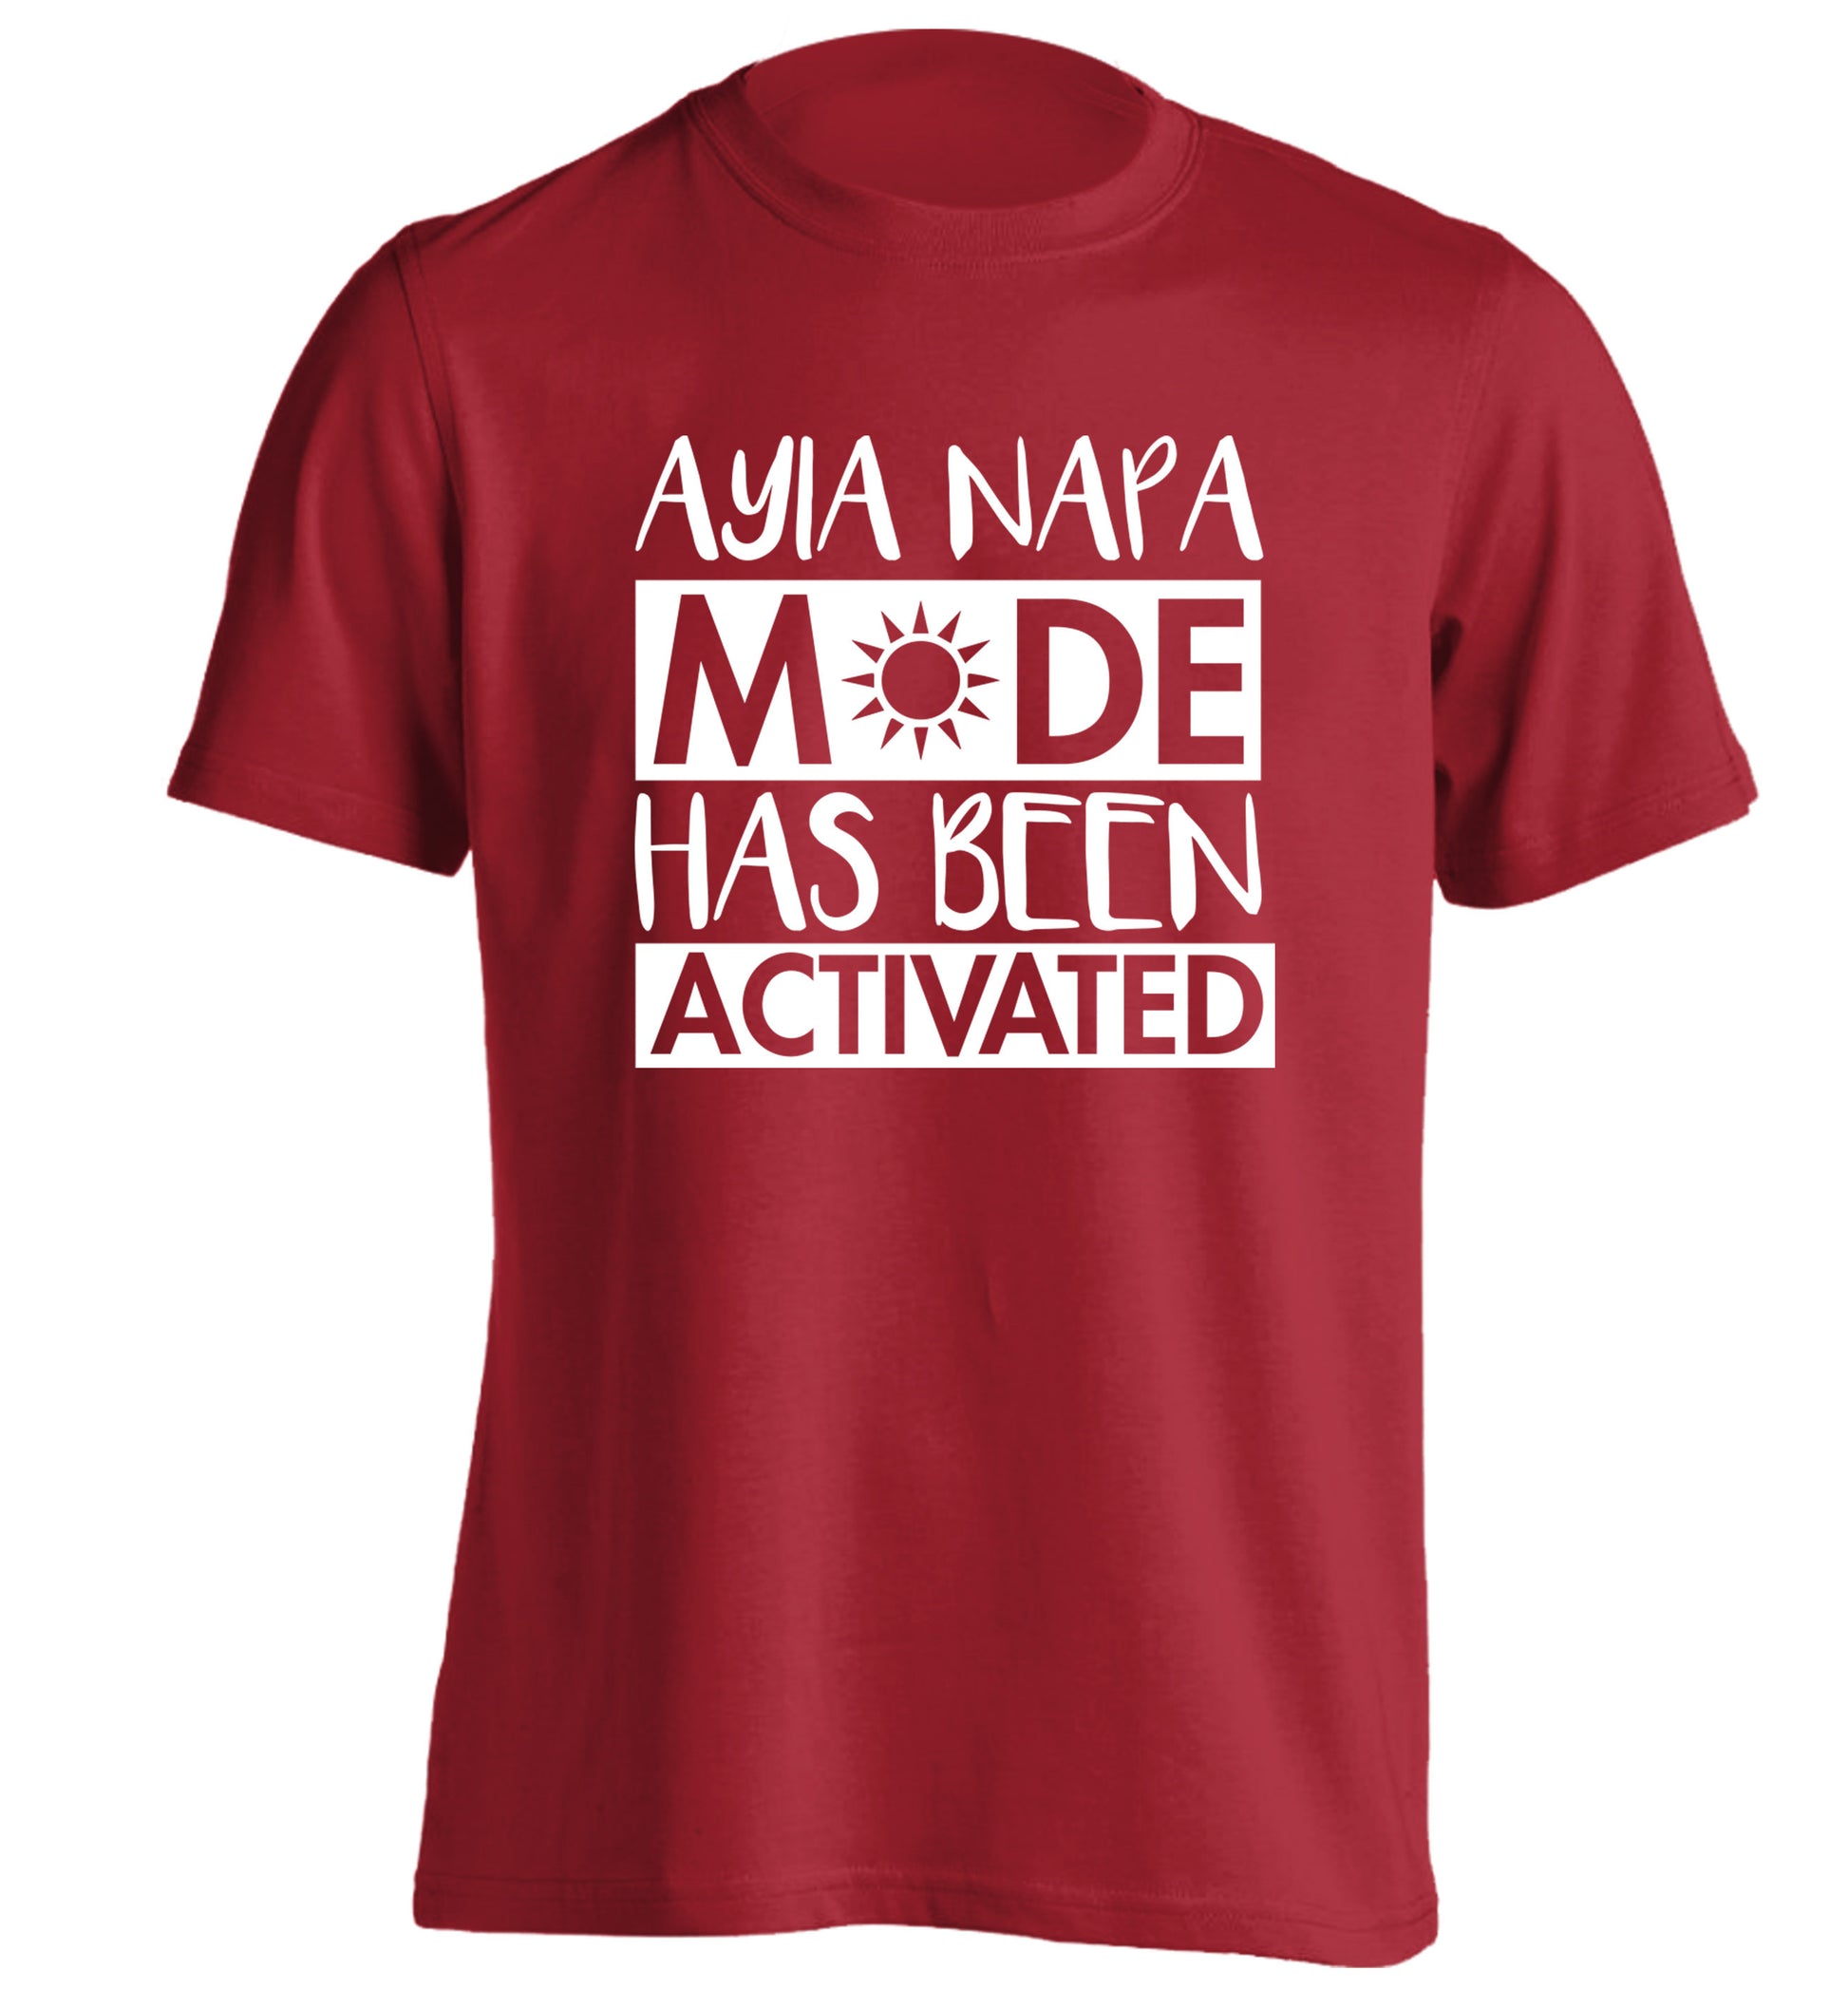 Aiya Napa mode has been activated adults unisex red Tshirt 2XL